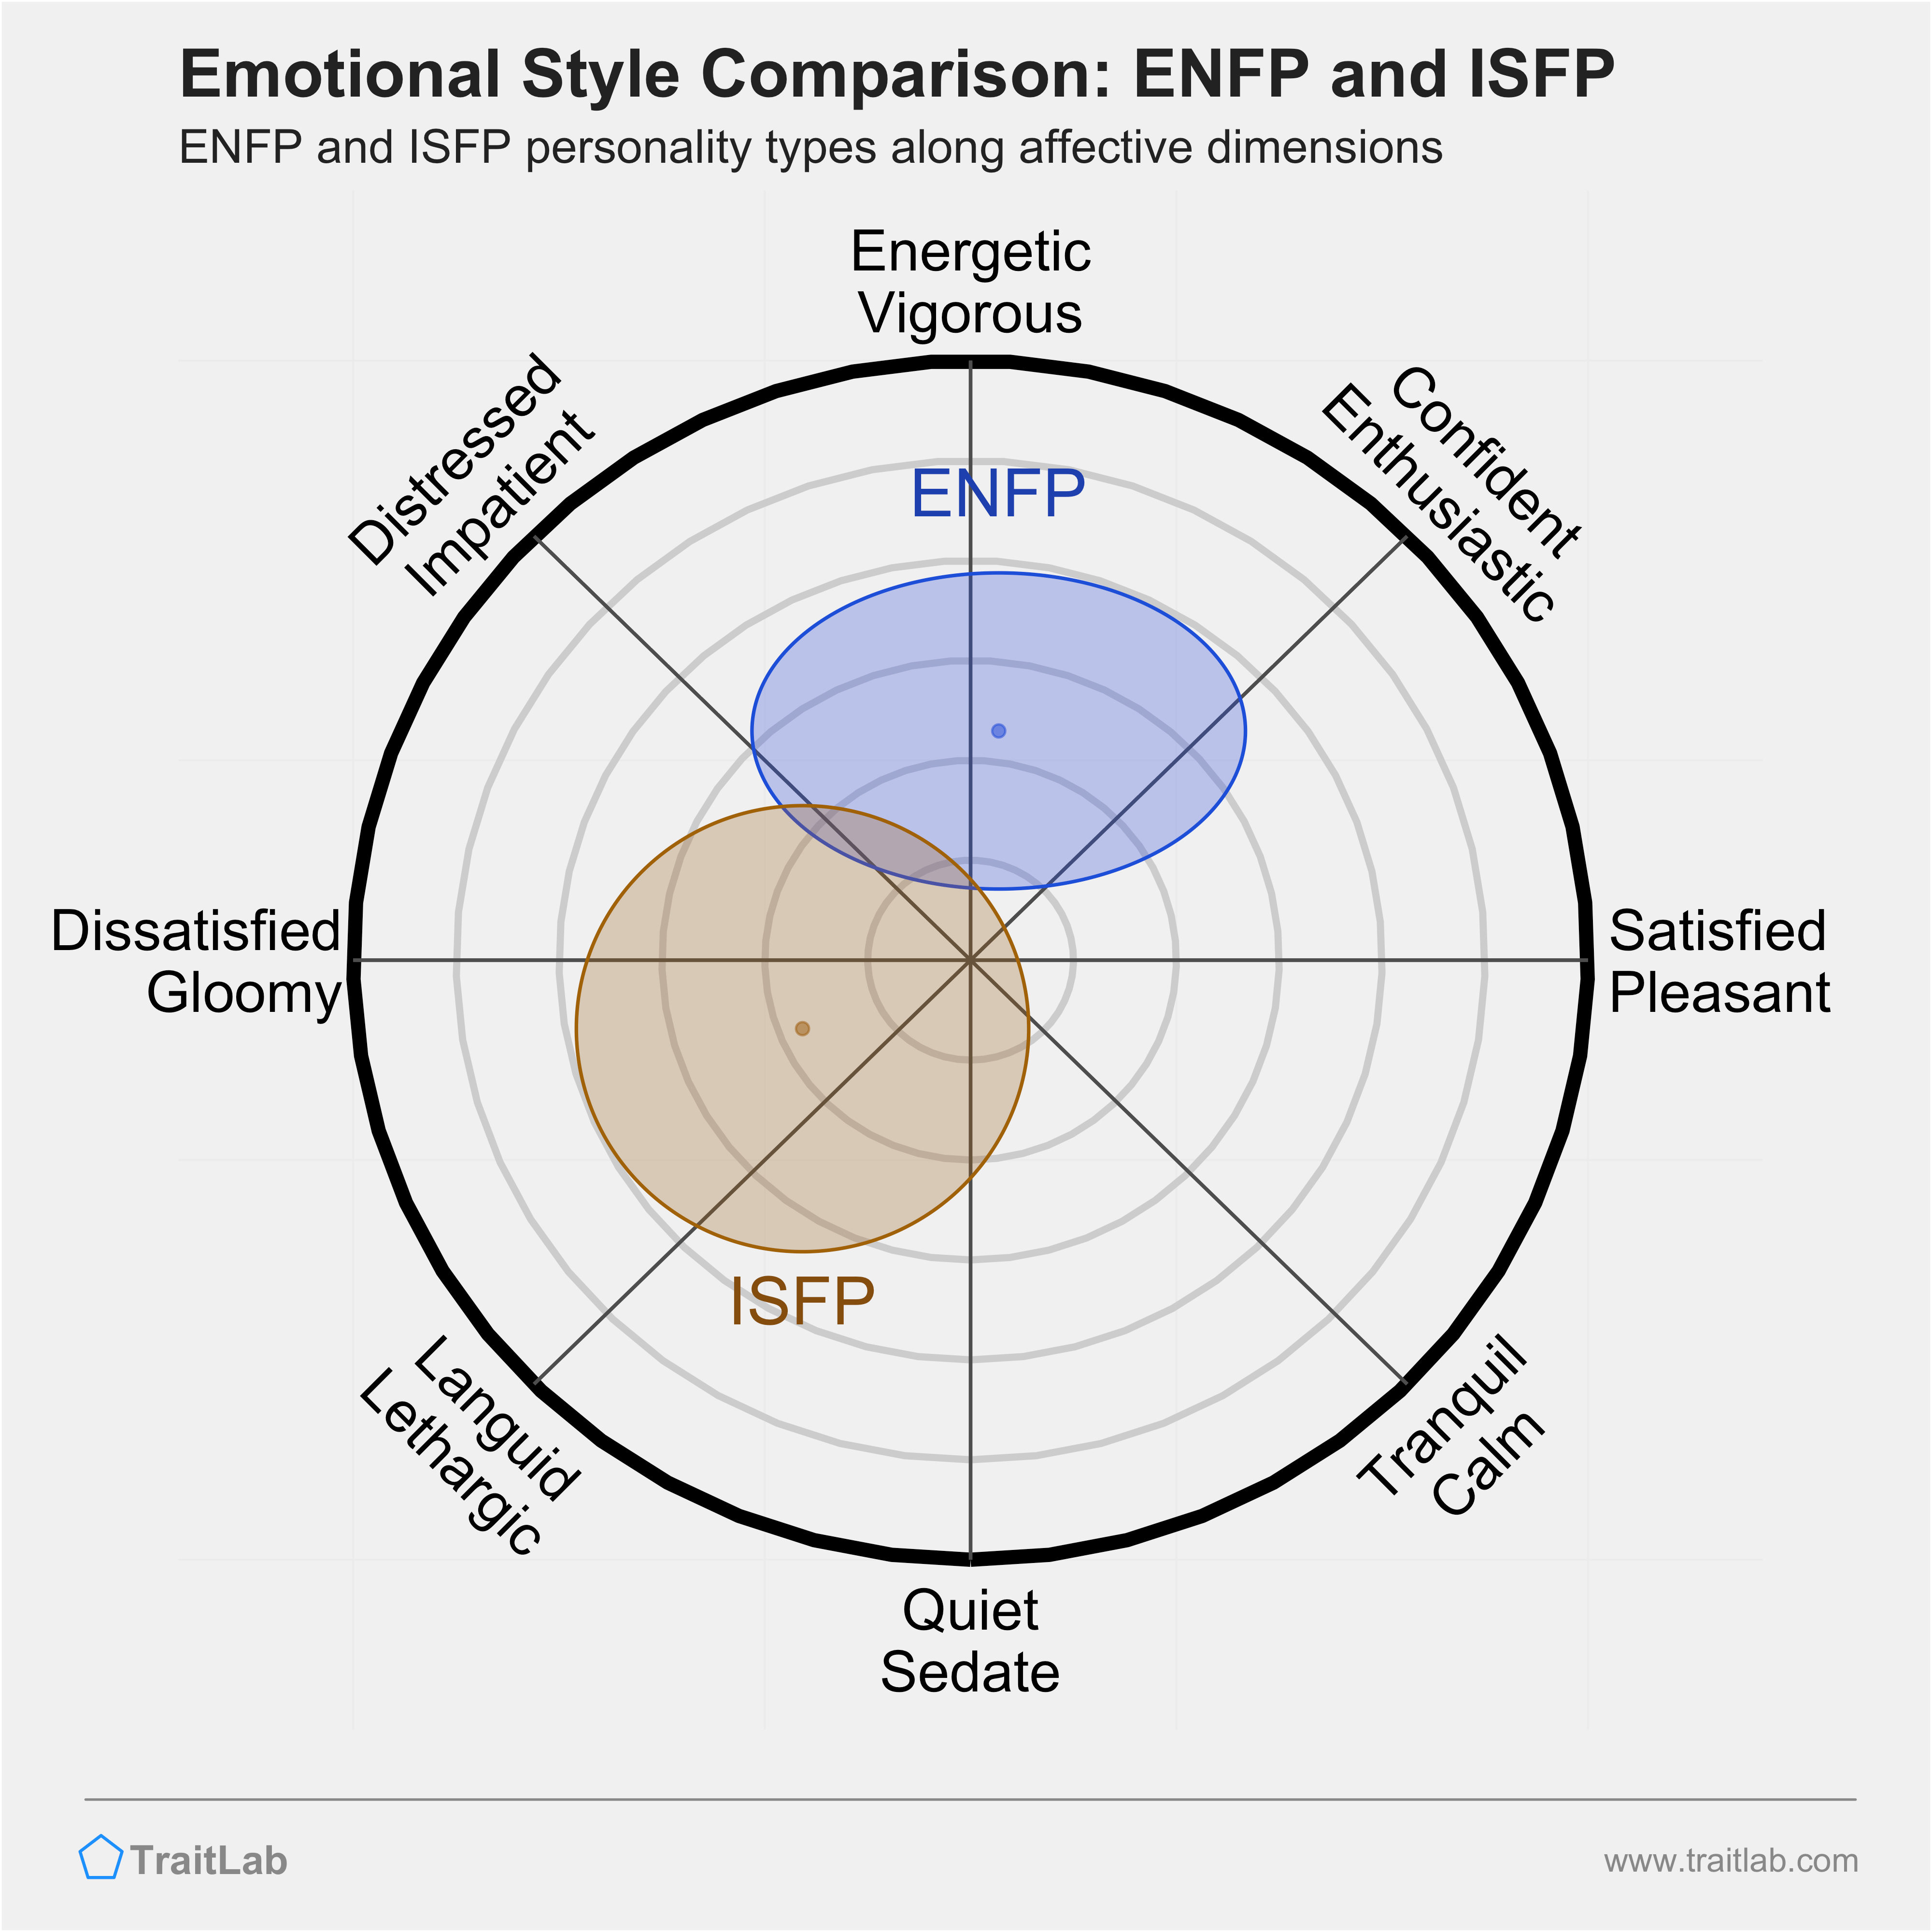 ENFP and ISFP comparison across emotional (affective) dimensions